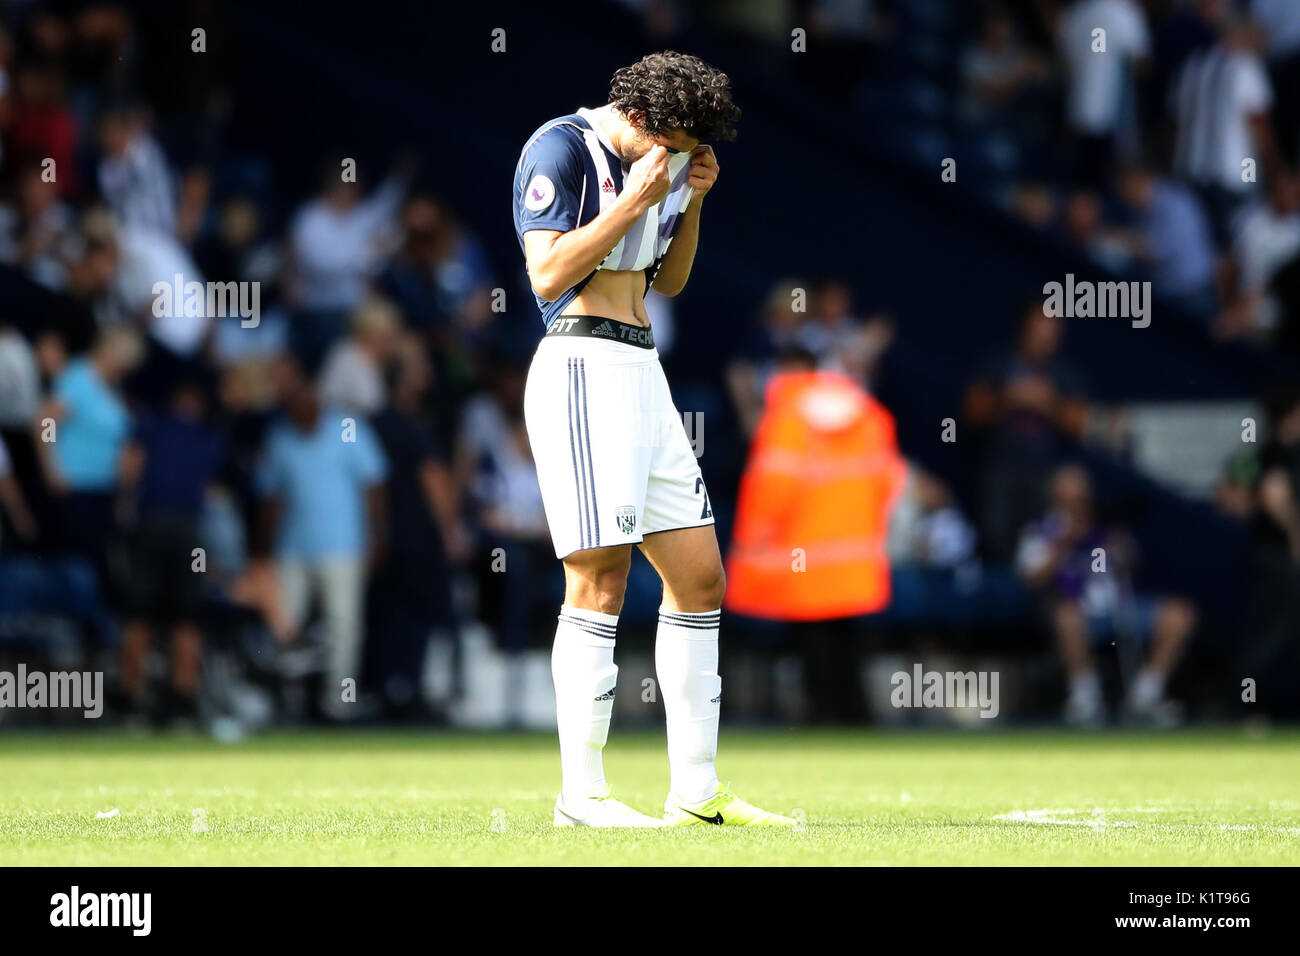 West Bromwich Albion's Ahmed Hegazy shows his frustration after the final whistle of the Premier League match at The Hawthorns, West Bromwich. Stock Photo